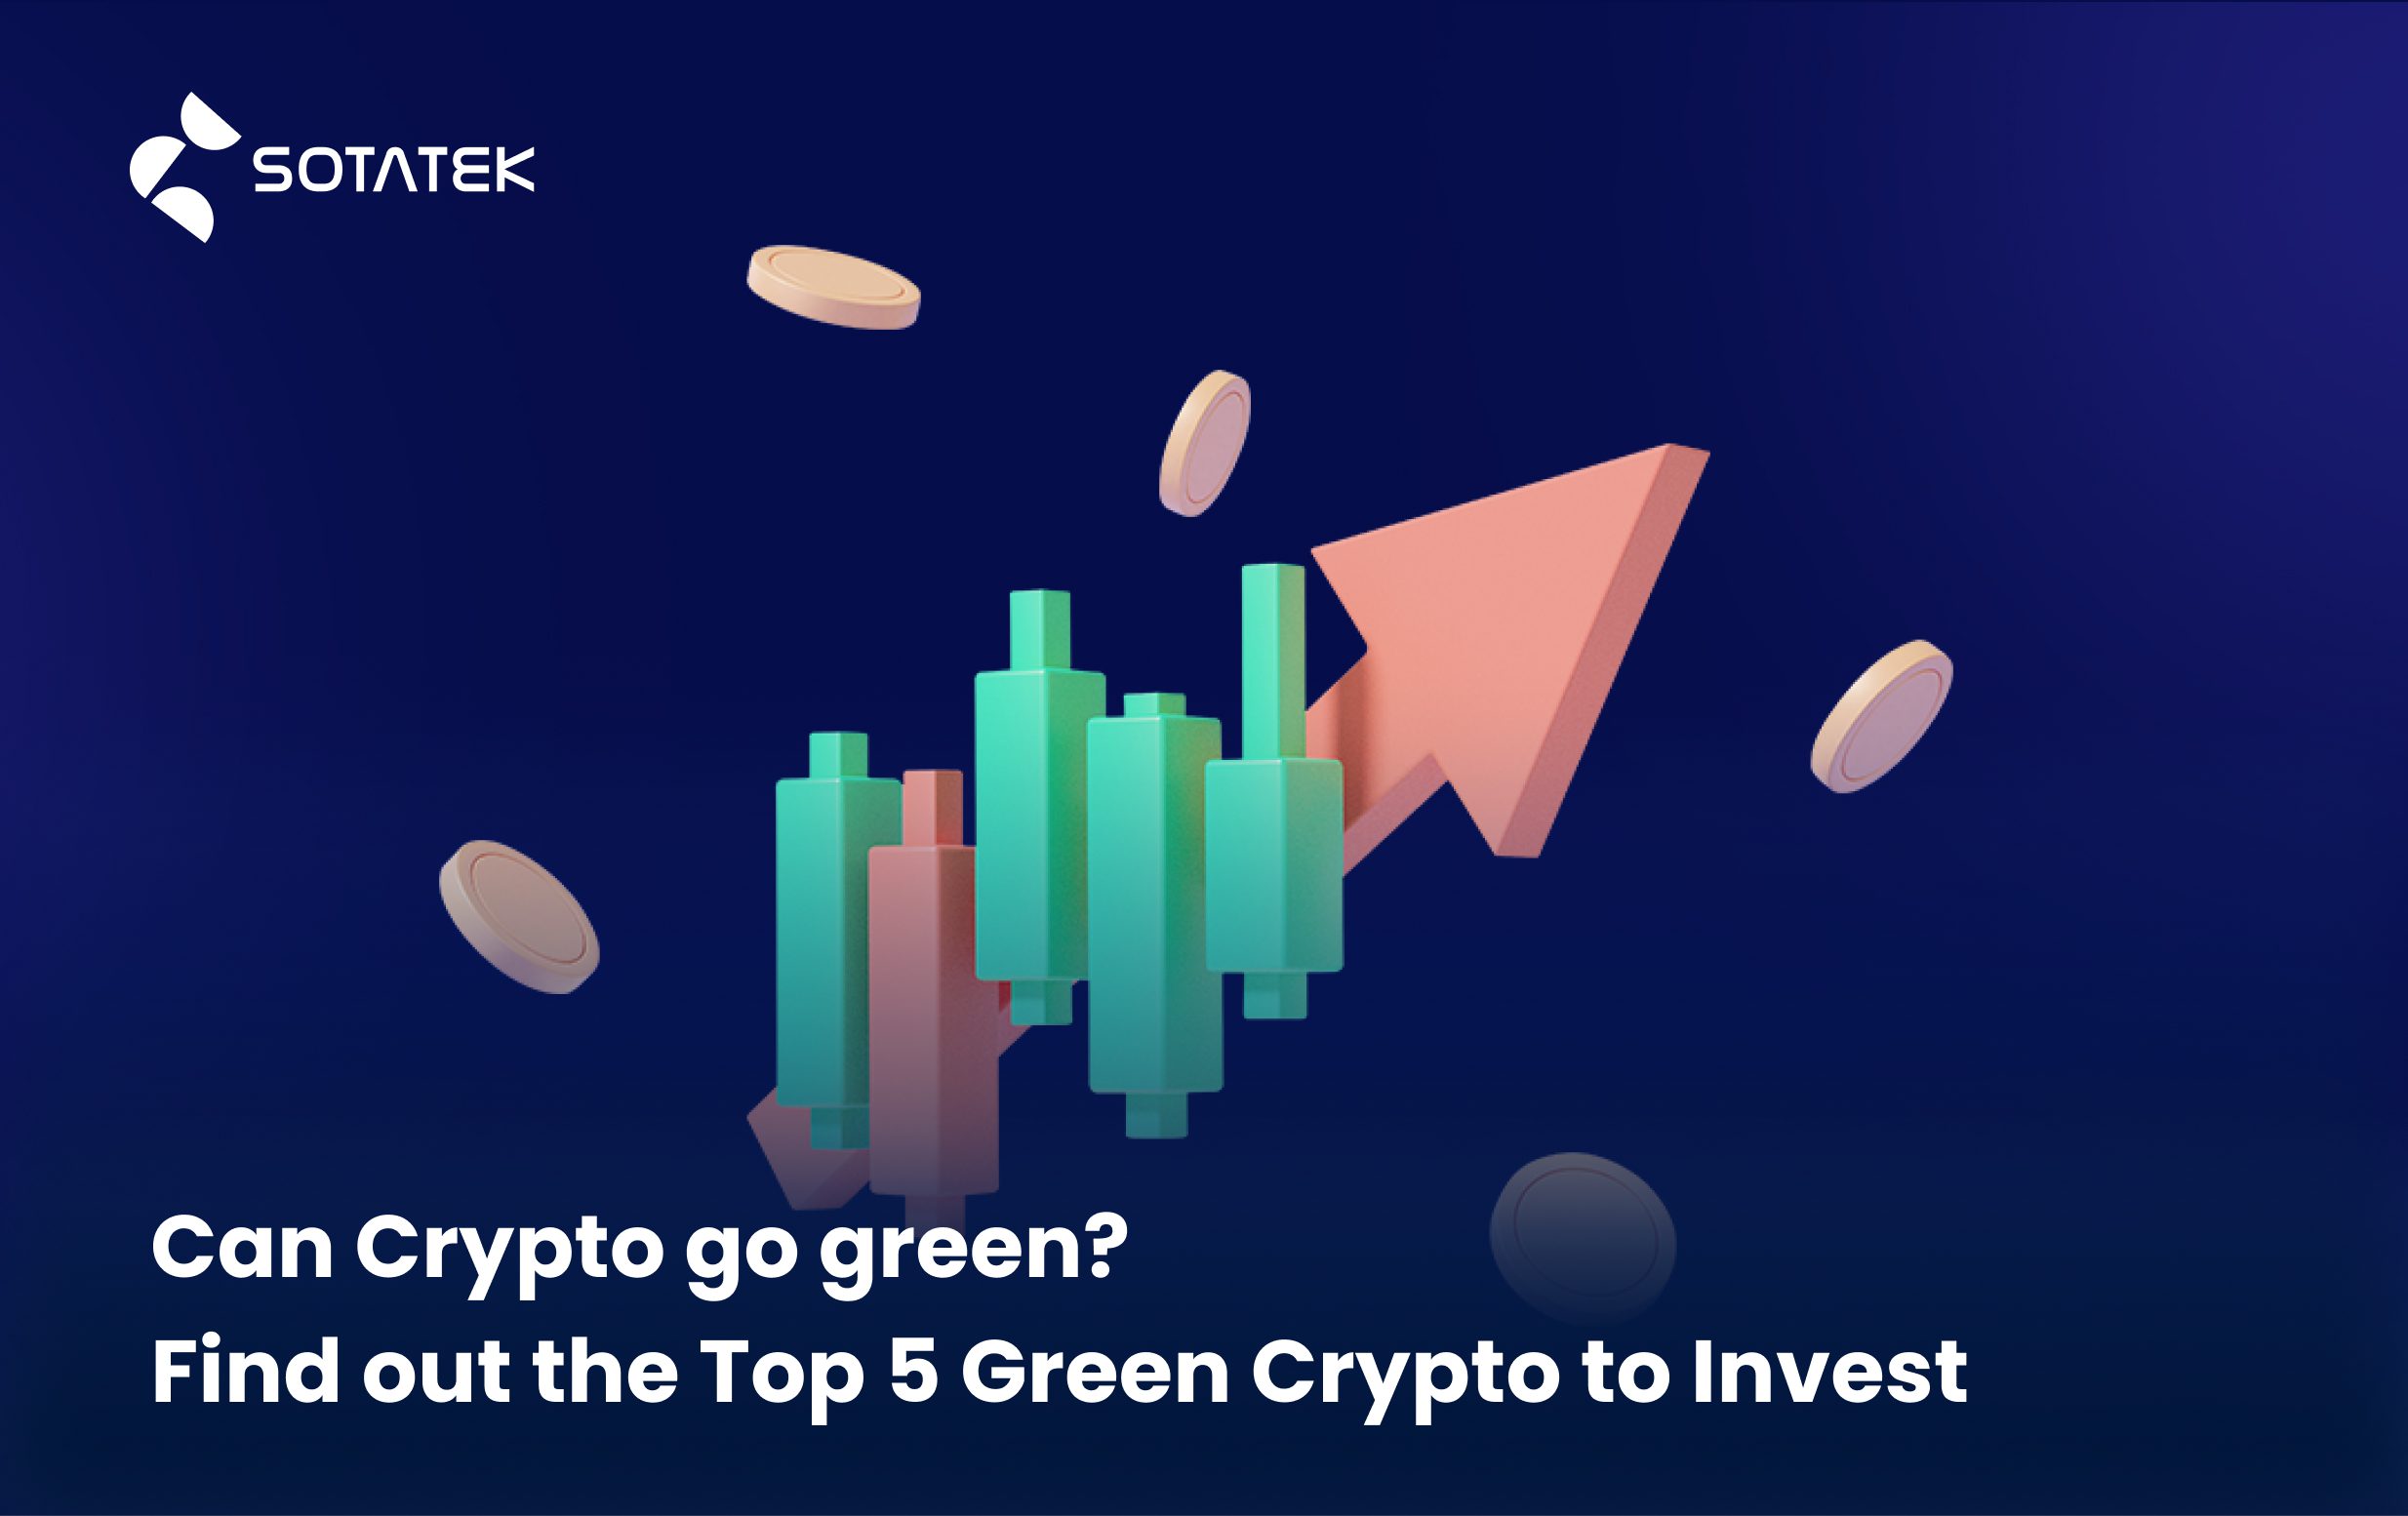 Can Crypto go green? Find out Top 5 Green Crypto to invest